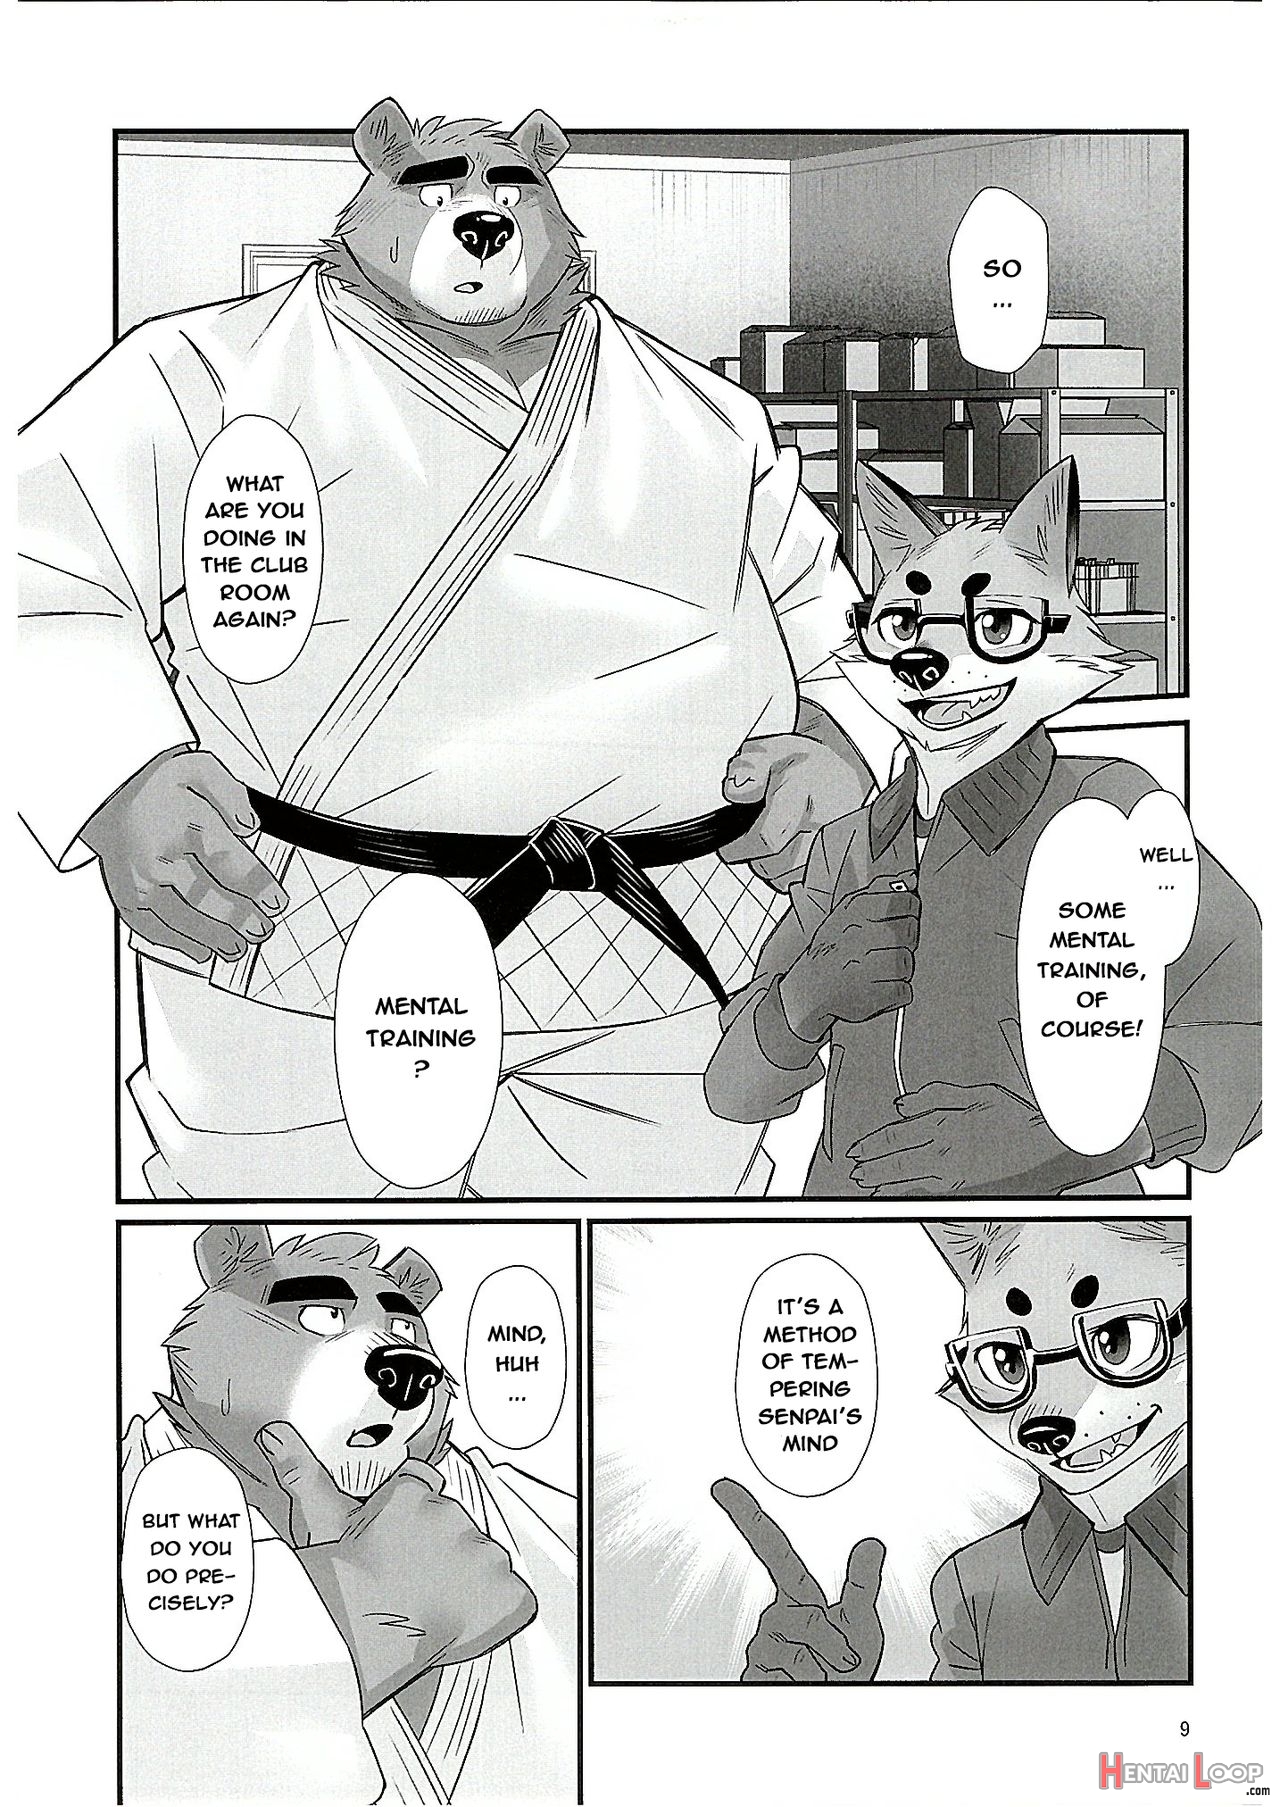 Mental Training page 8